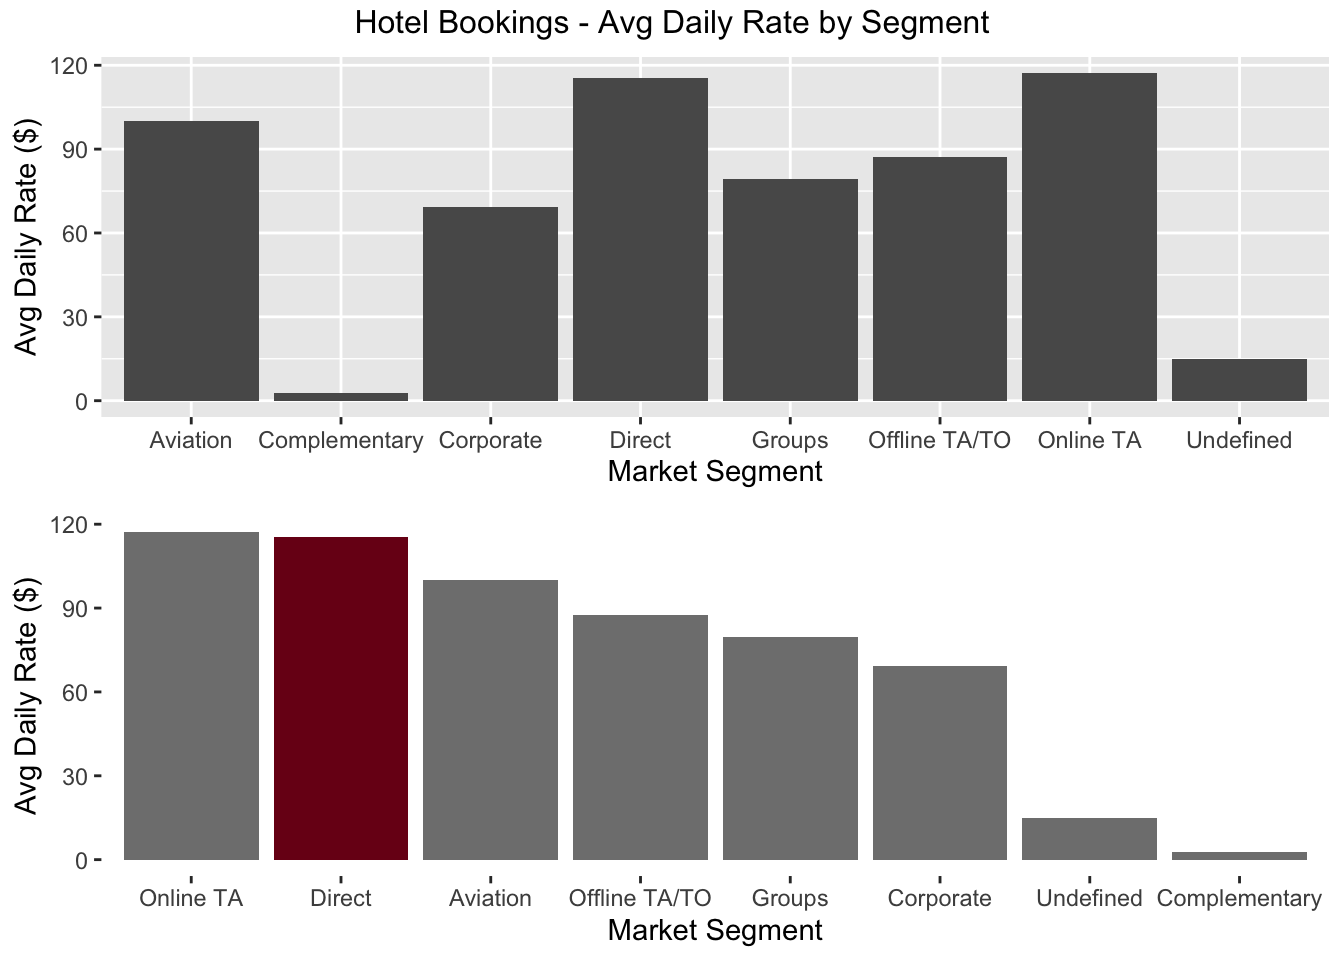 Bar Charts showing Average Daily Rate by Market Segment